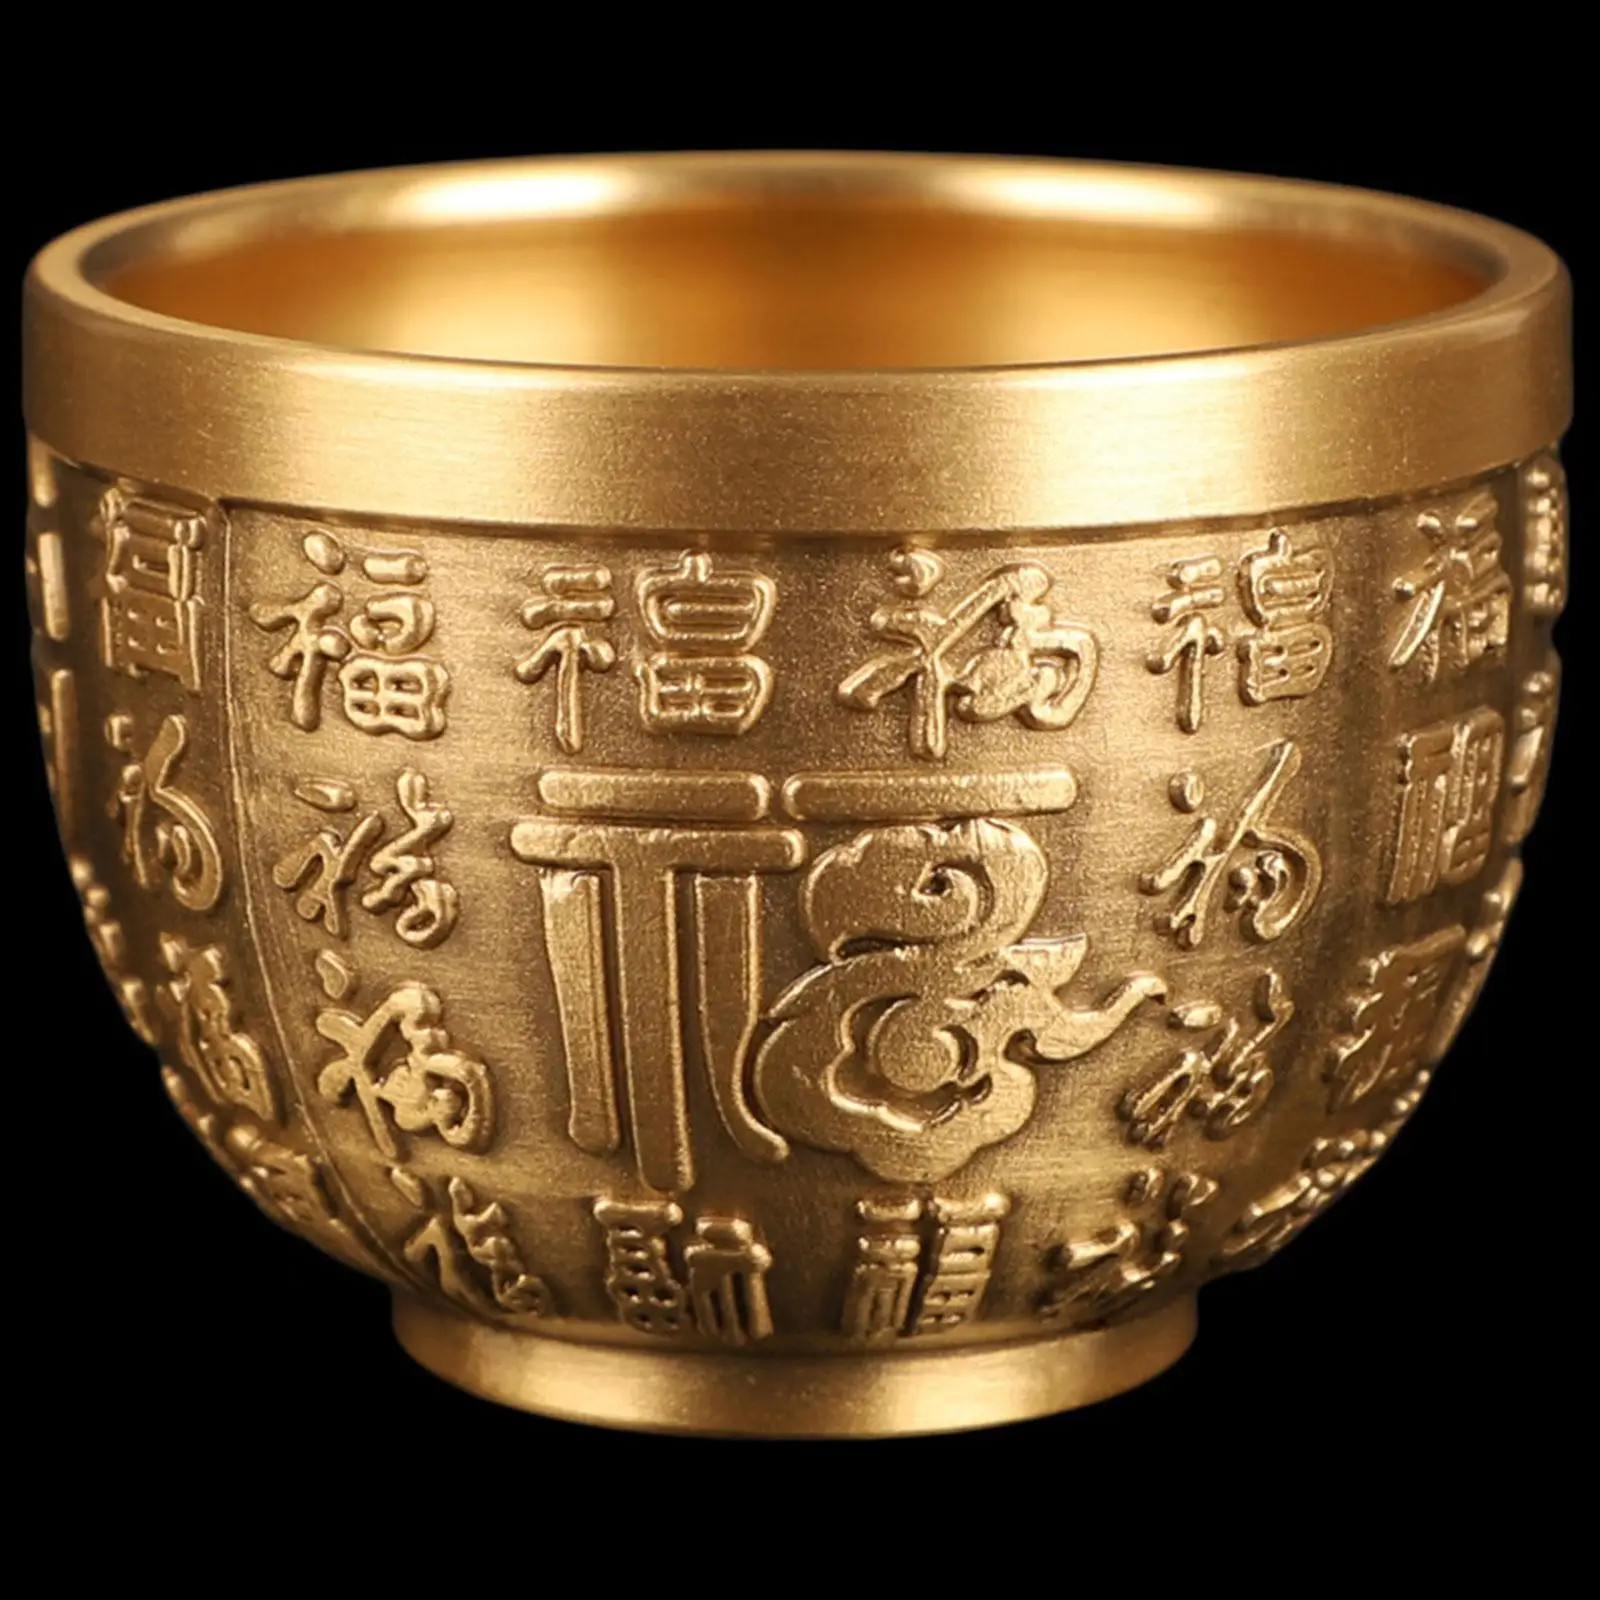 Brass Fu Bowl, Desktop Decor Ornaments Chinese Character Traditional Fortune Treasure Bowl Feng Shui Bowl